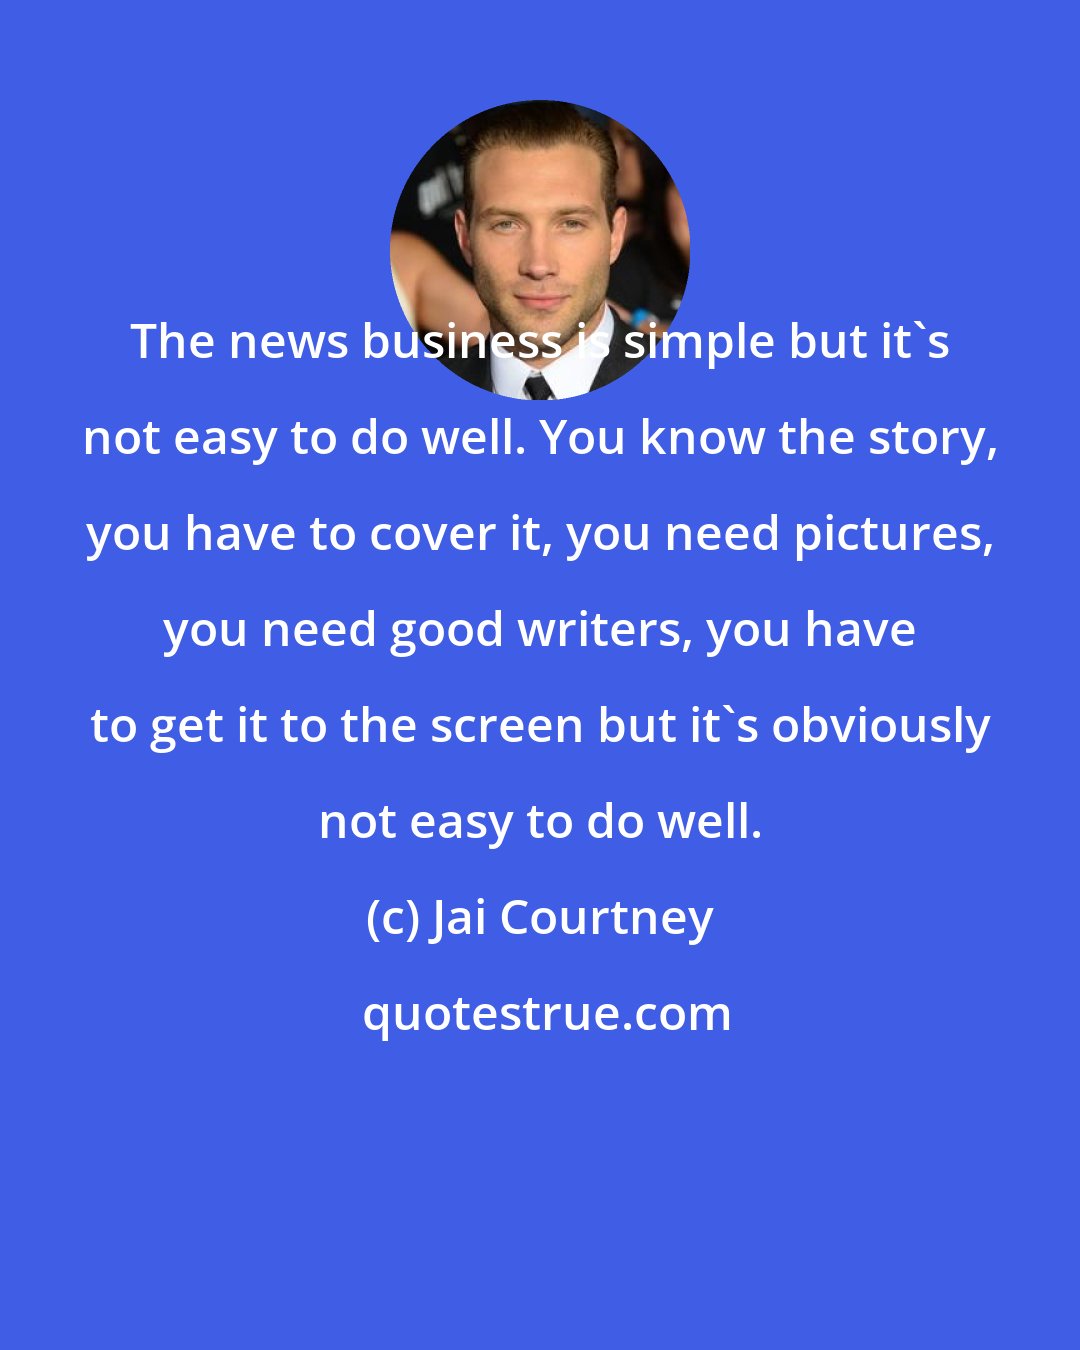 Jai Courtney: The news business is simple but it's not easy to do well. You know the story, you have to cover it, you need pictures, you need good writers, you have to get it to the screen but it's obviously not easy to do well.